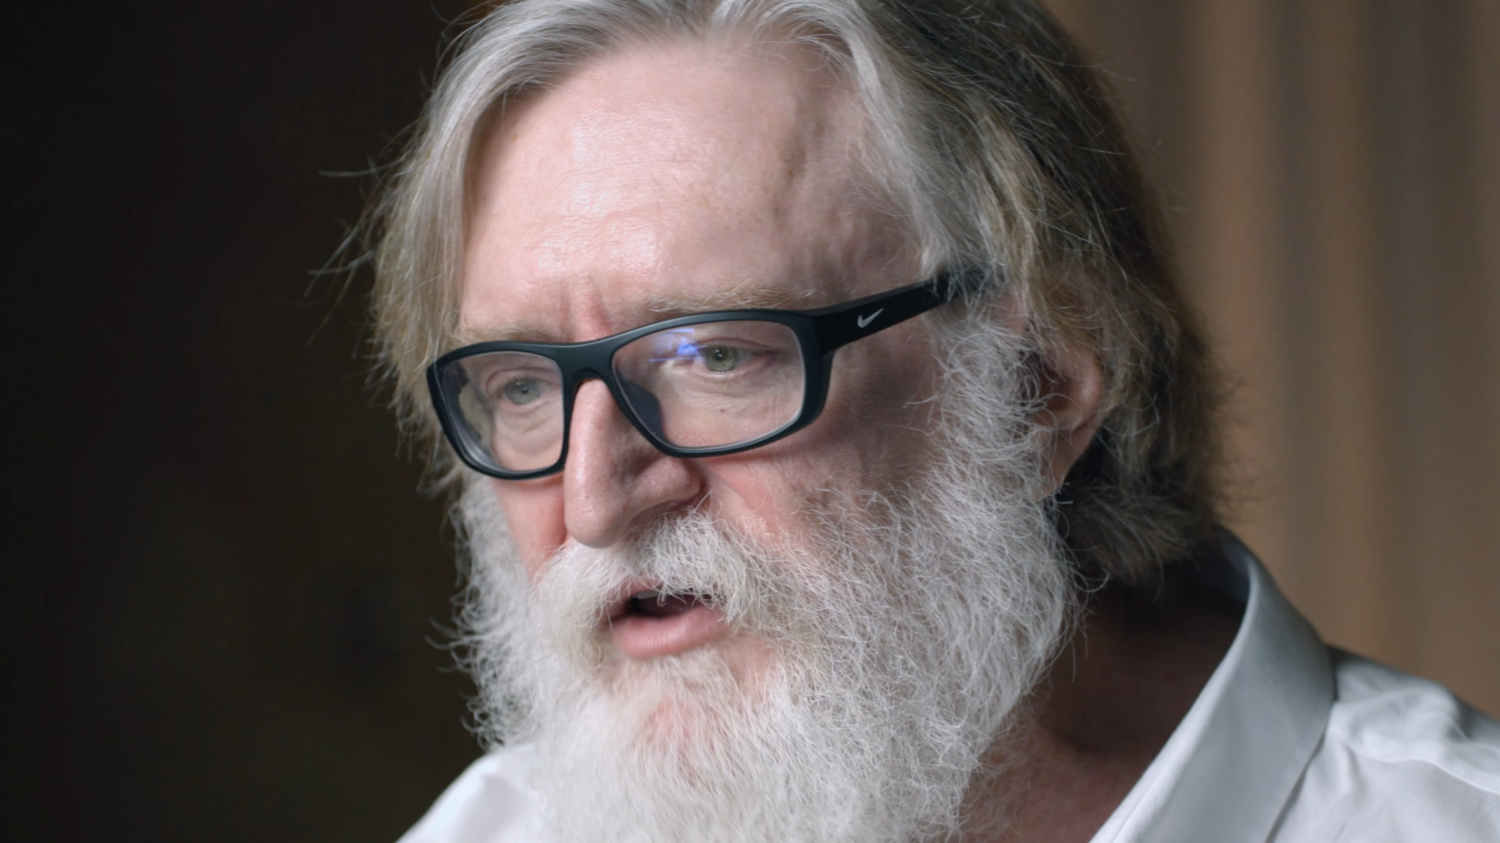 Business of Esports - Gabe Newell Discusses The Future Of Valve